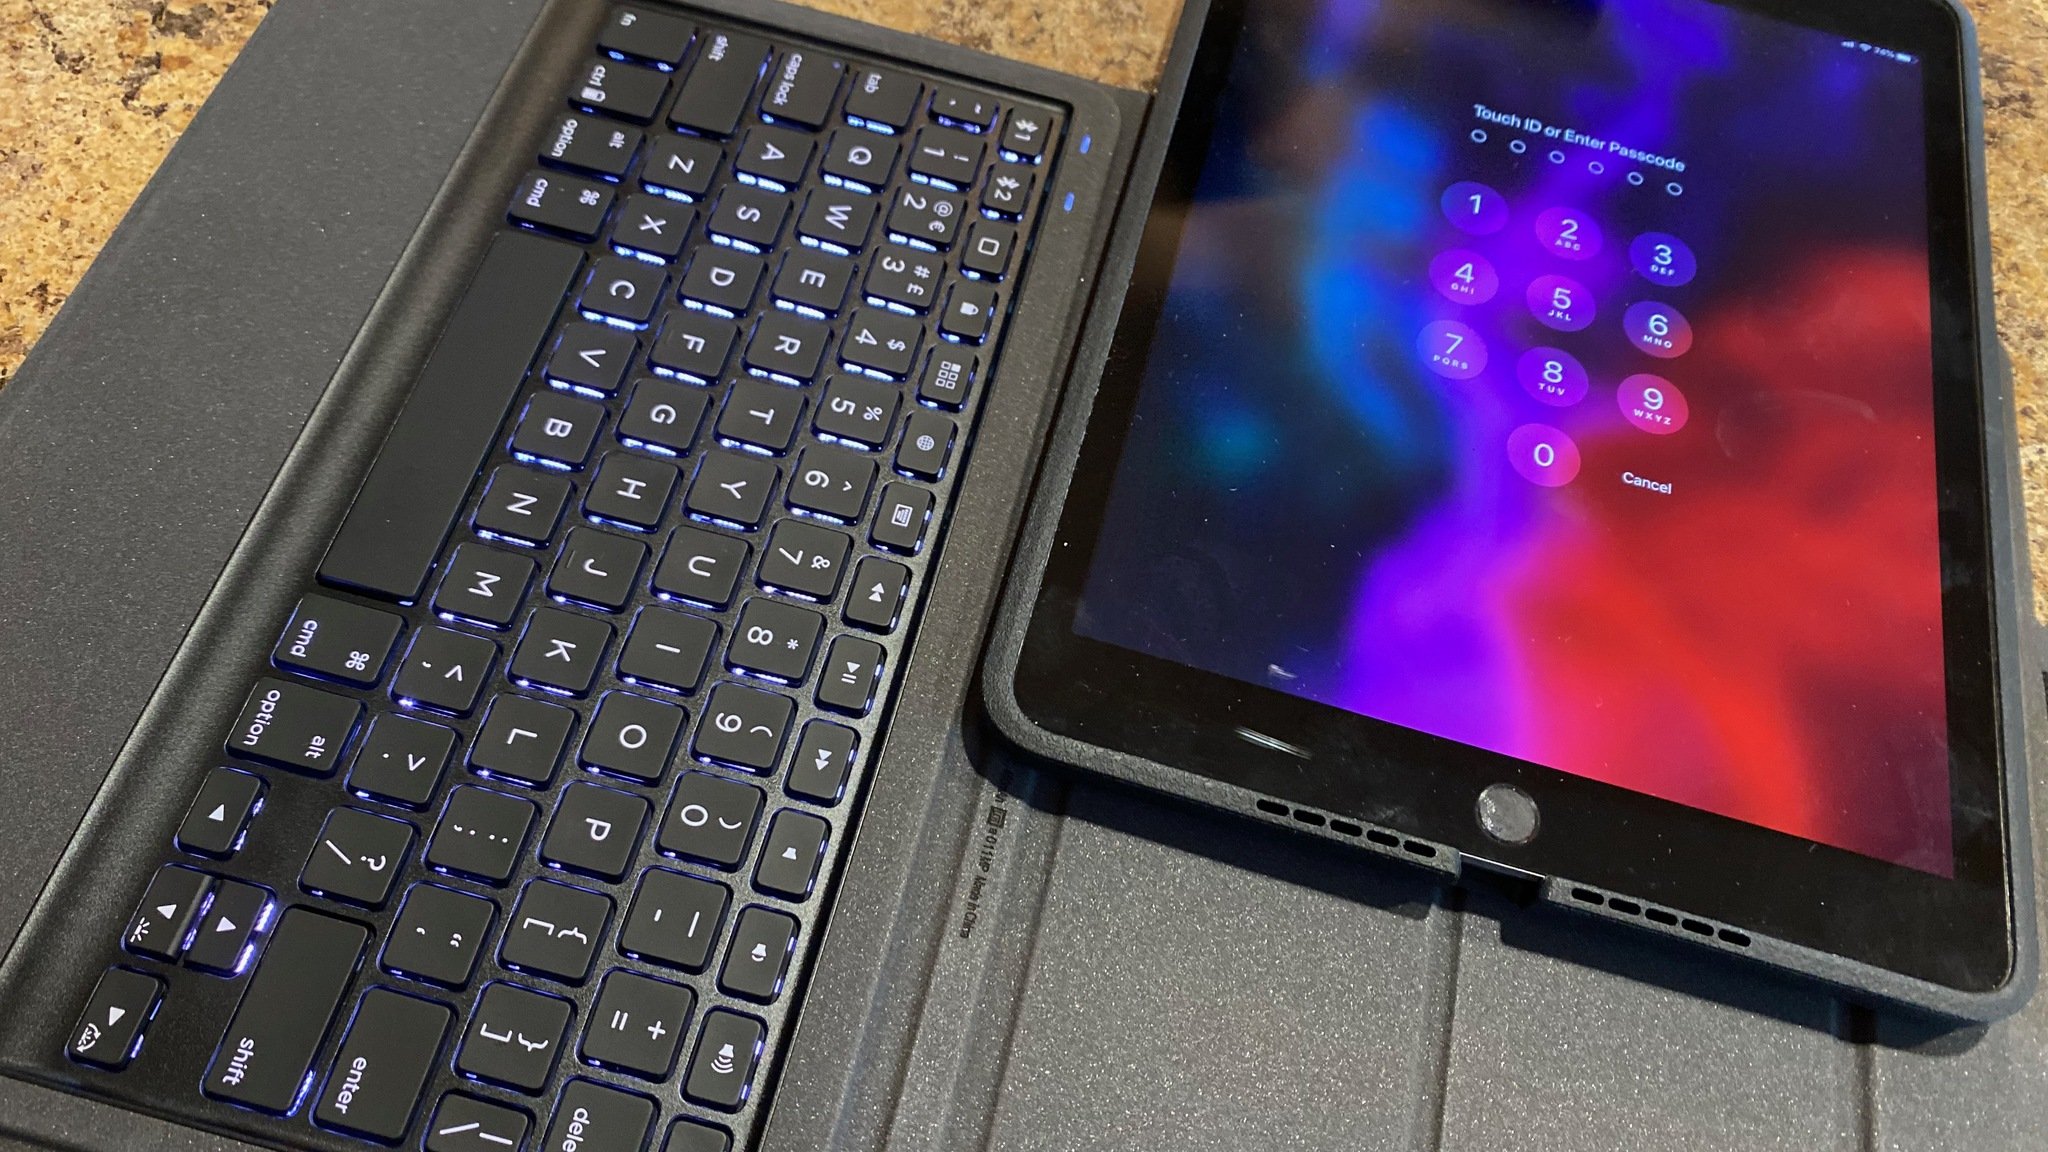 Zagg Rugged Messenger for the 10.2-inch iPad (2019)